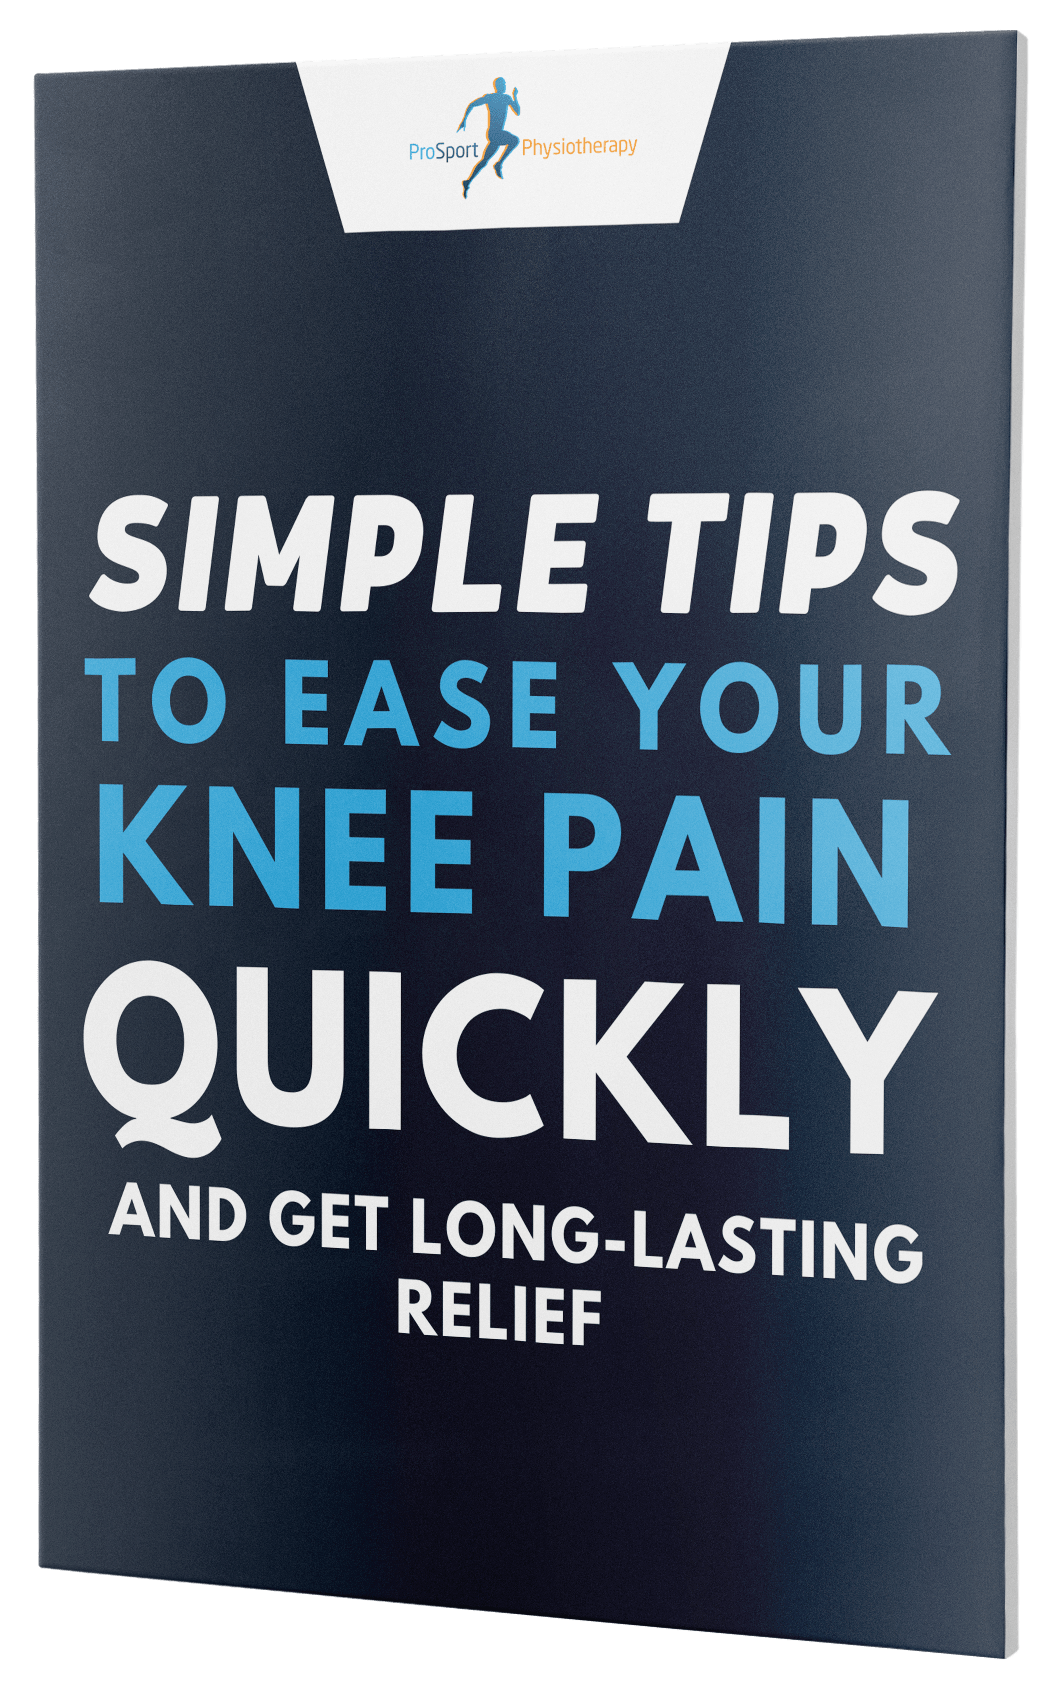 Knee Pain Relief PDF Guide - Pro Sport Physiotherapy Huddersfield Clinic